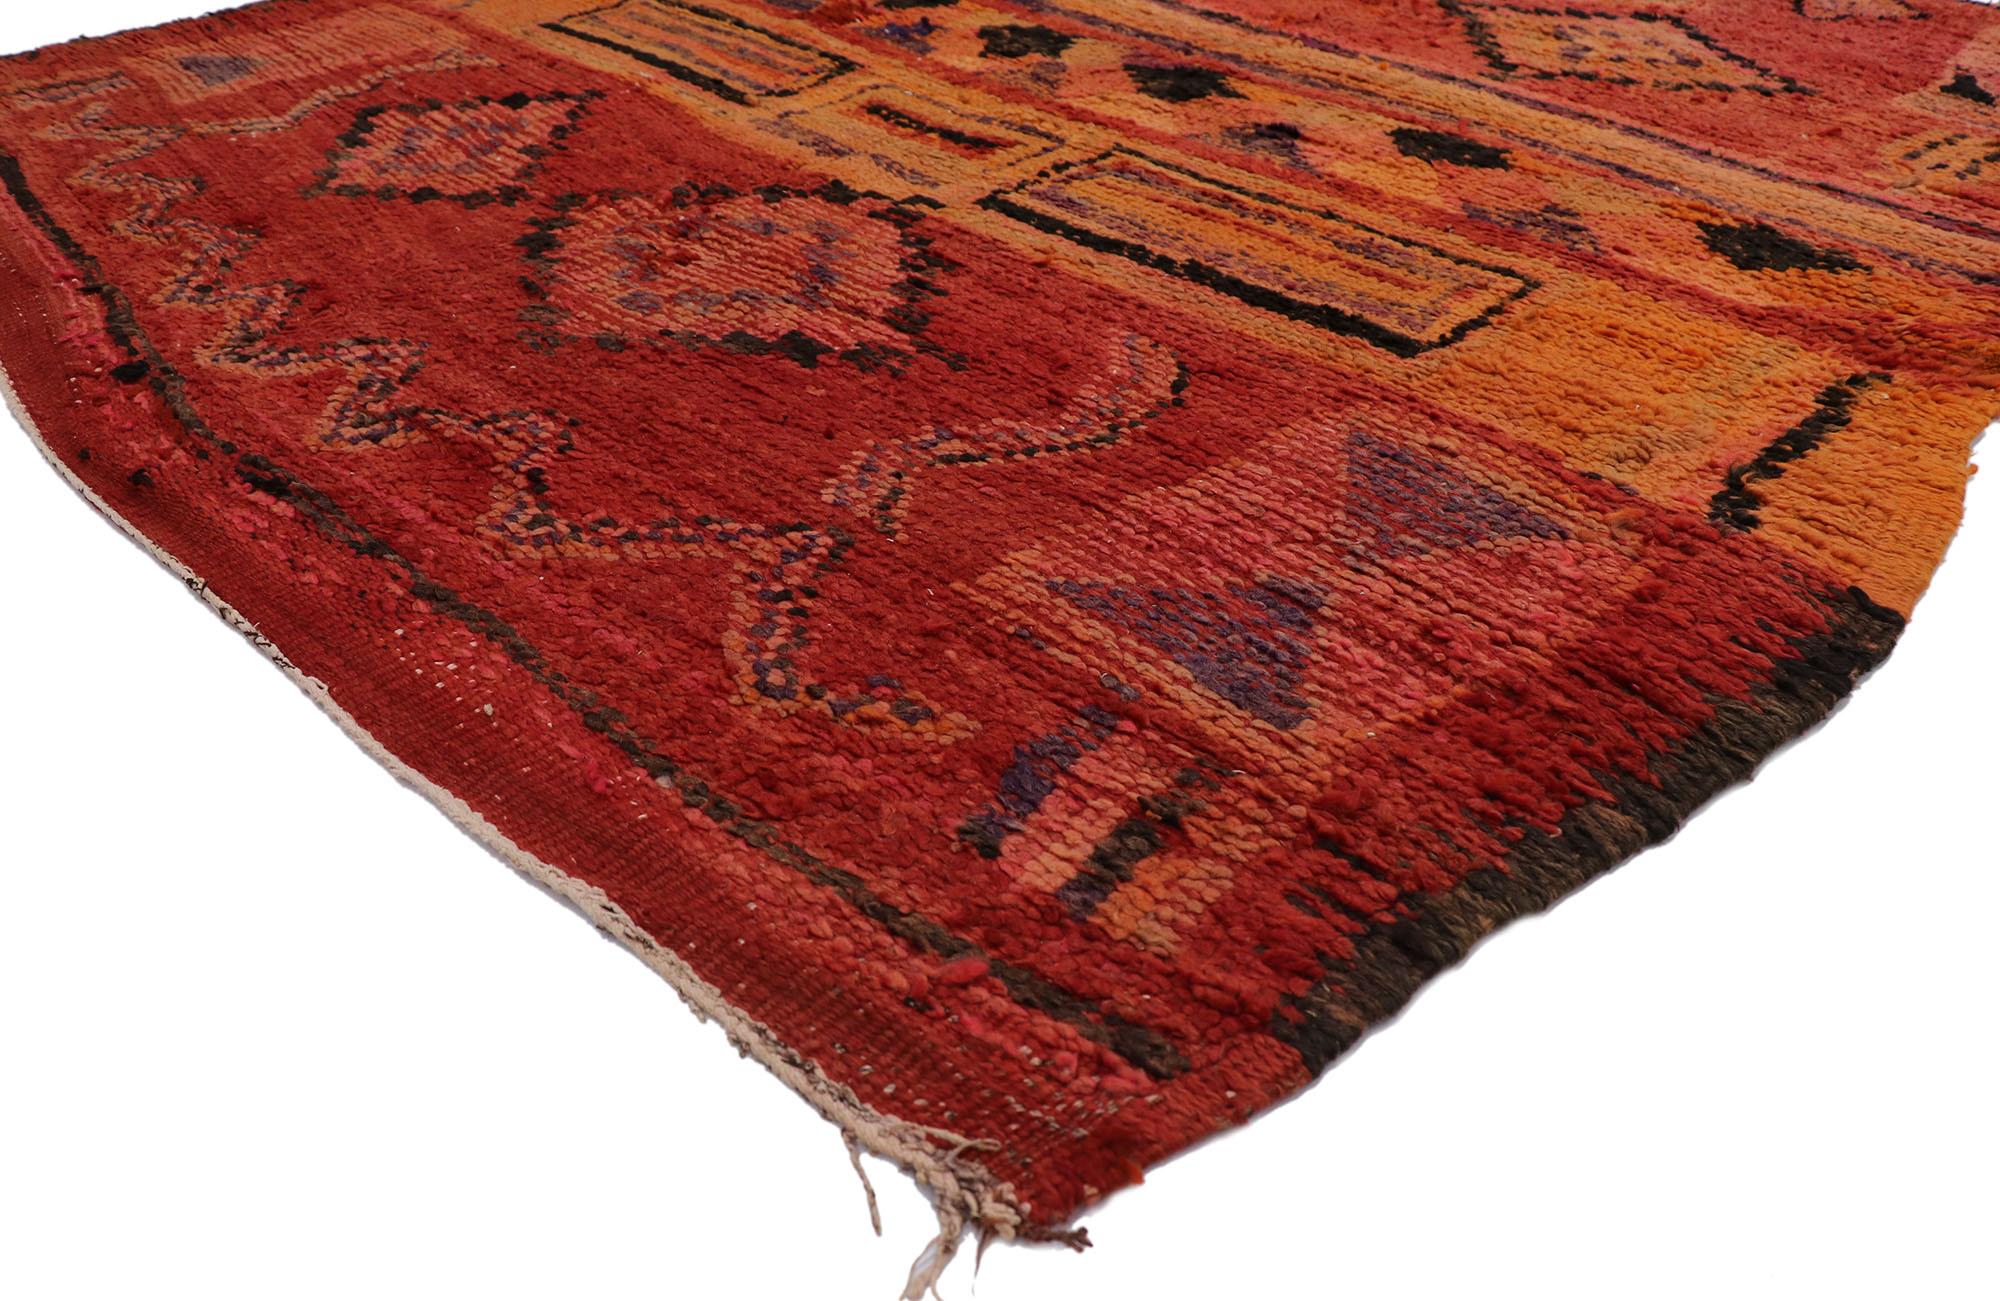 21326 Vintage Moroccan Rug, 06'10 x 07'09.
Boho Chic meets Wabi-Sabi in this hand knotted wool vintage Moroccan rug. The perfectly imperfect tribal design and vibrant colors woven into this piece work together creating a bold, expressive look. An